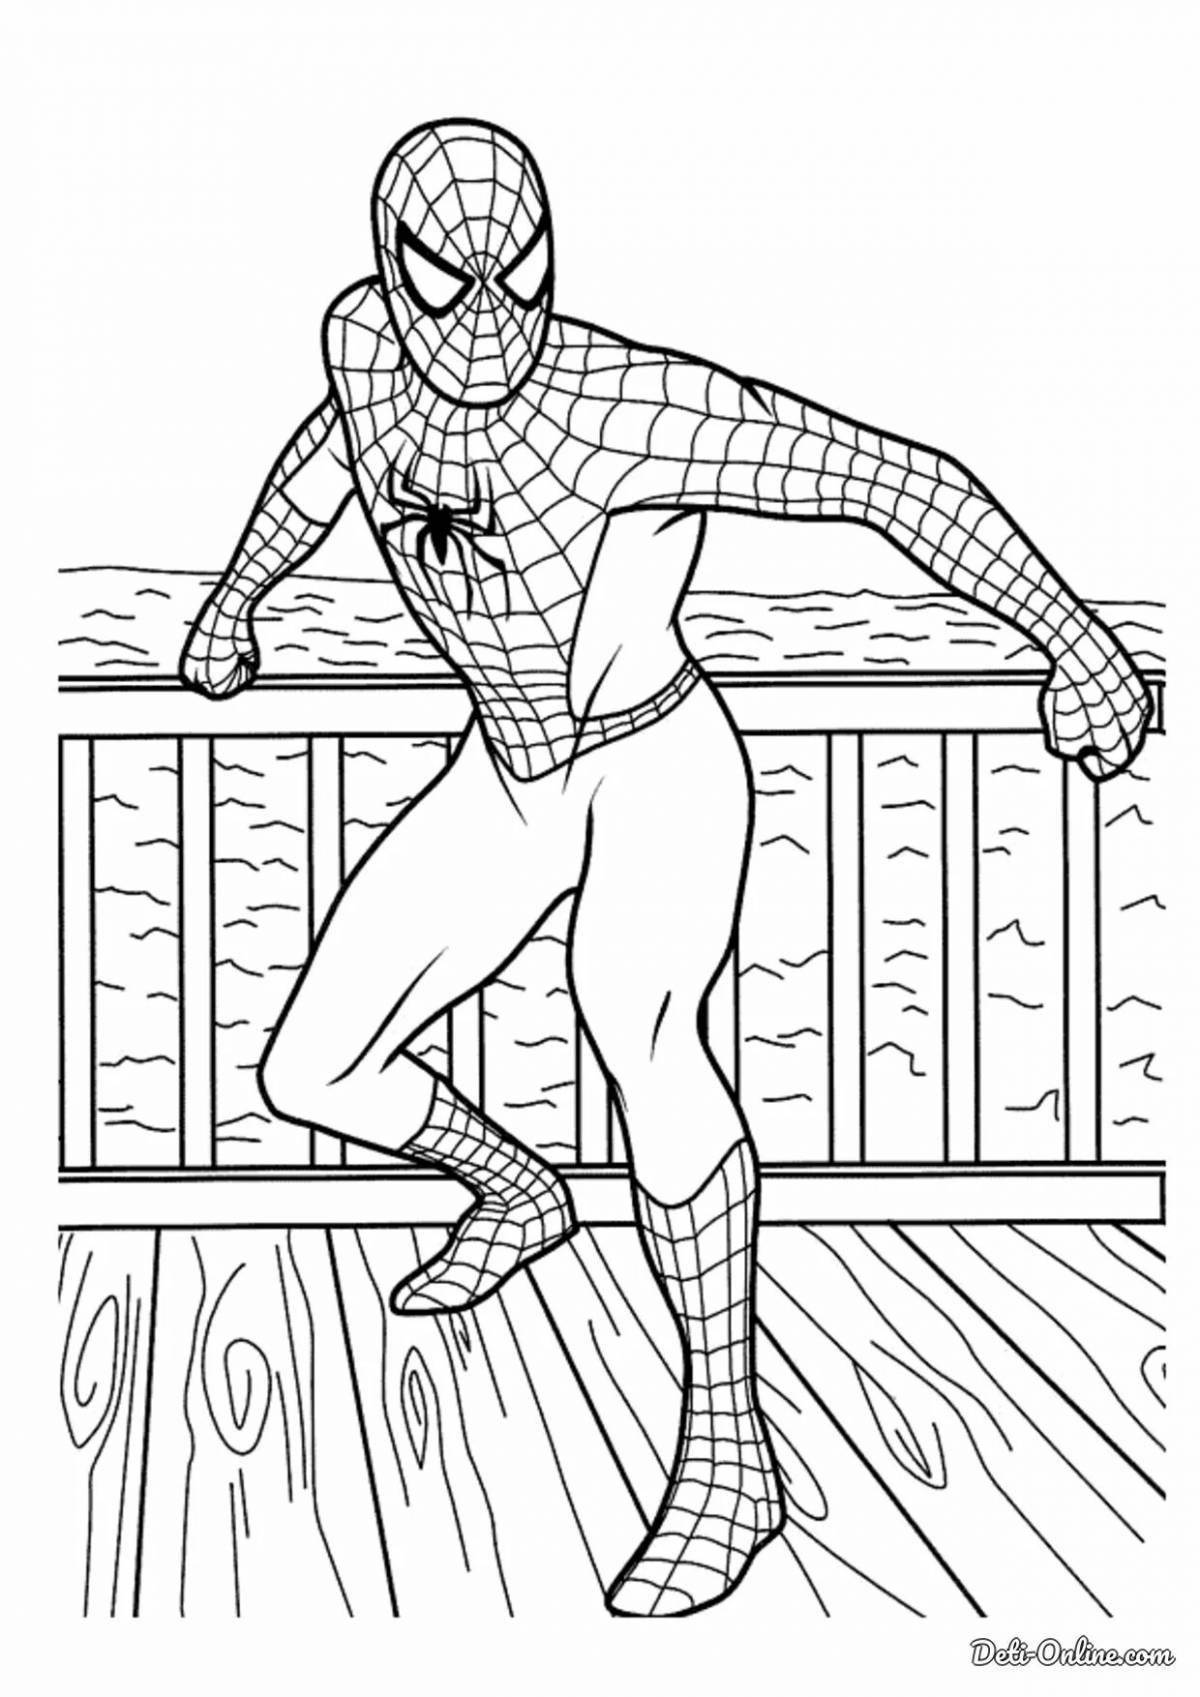 Colorful children's coloring Spiderman